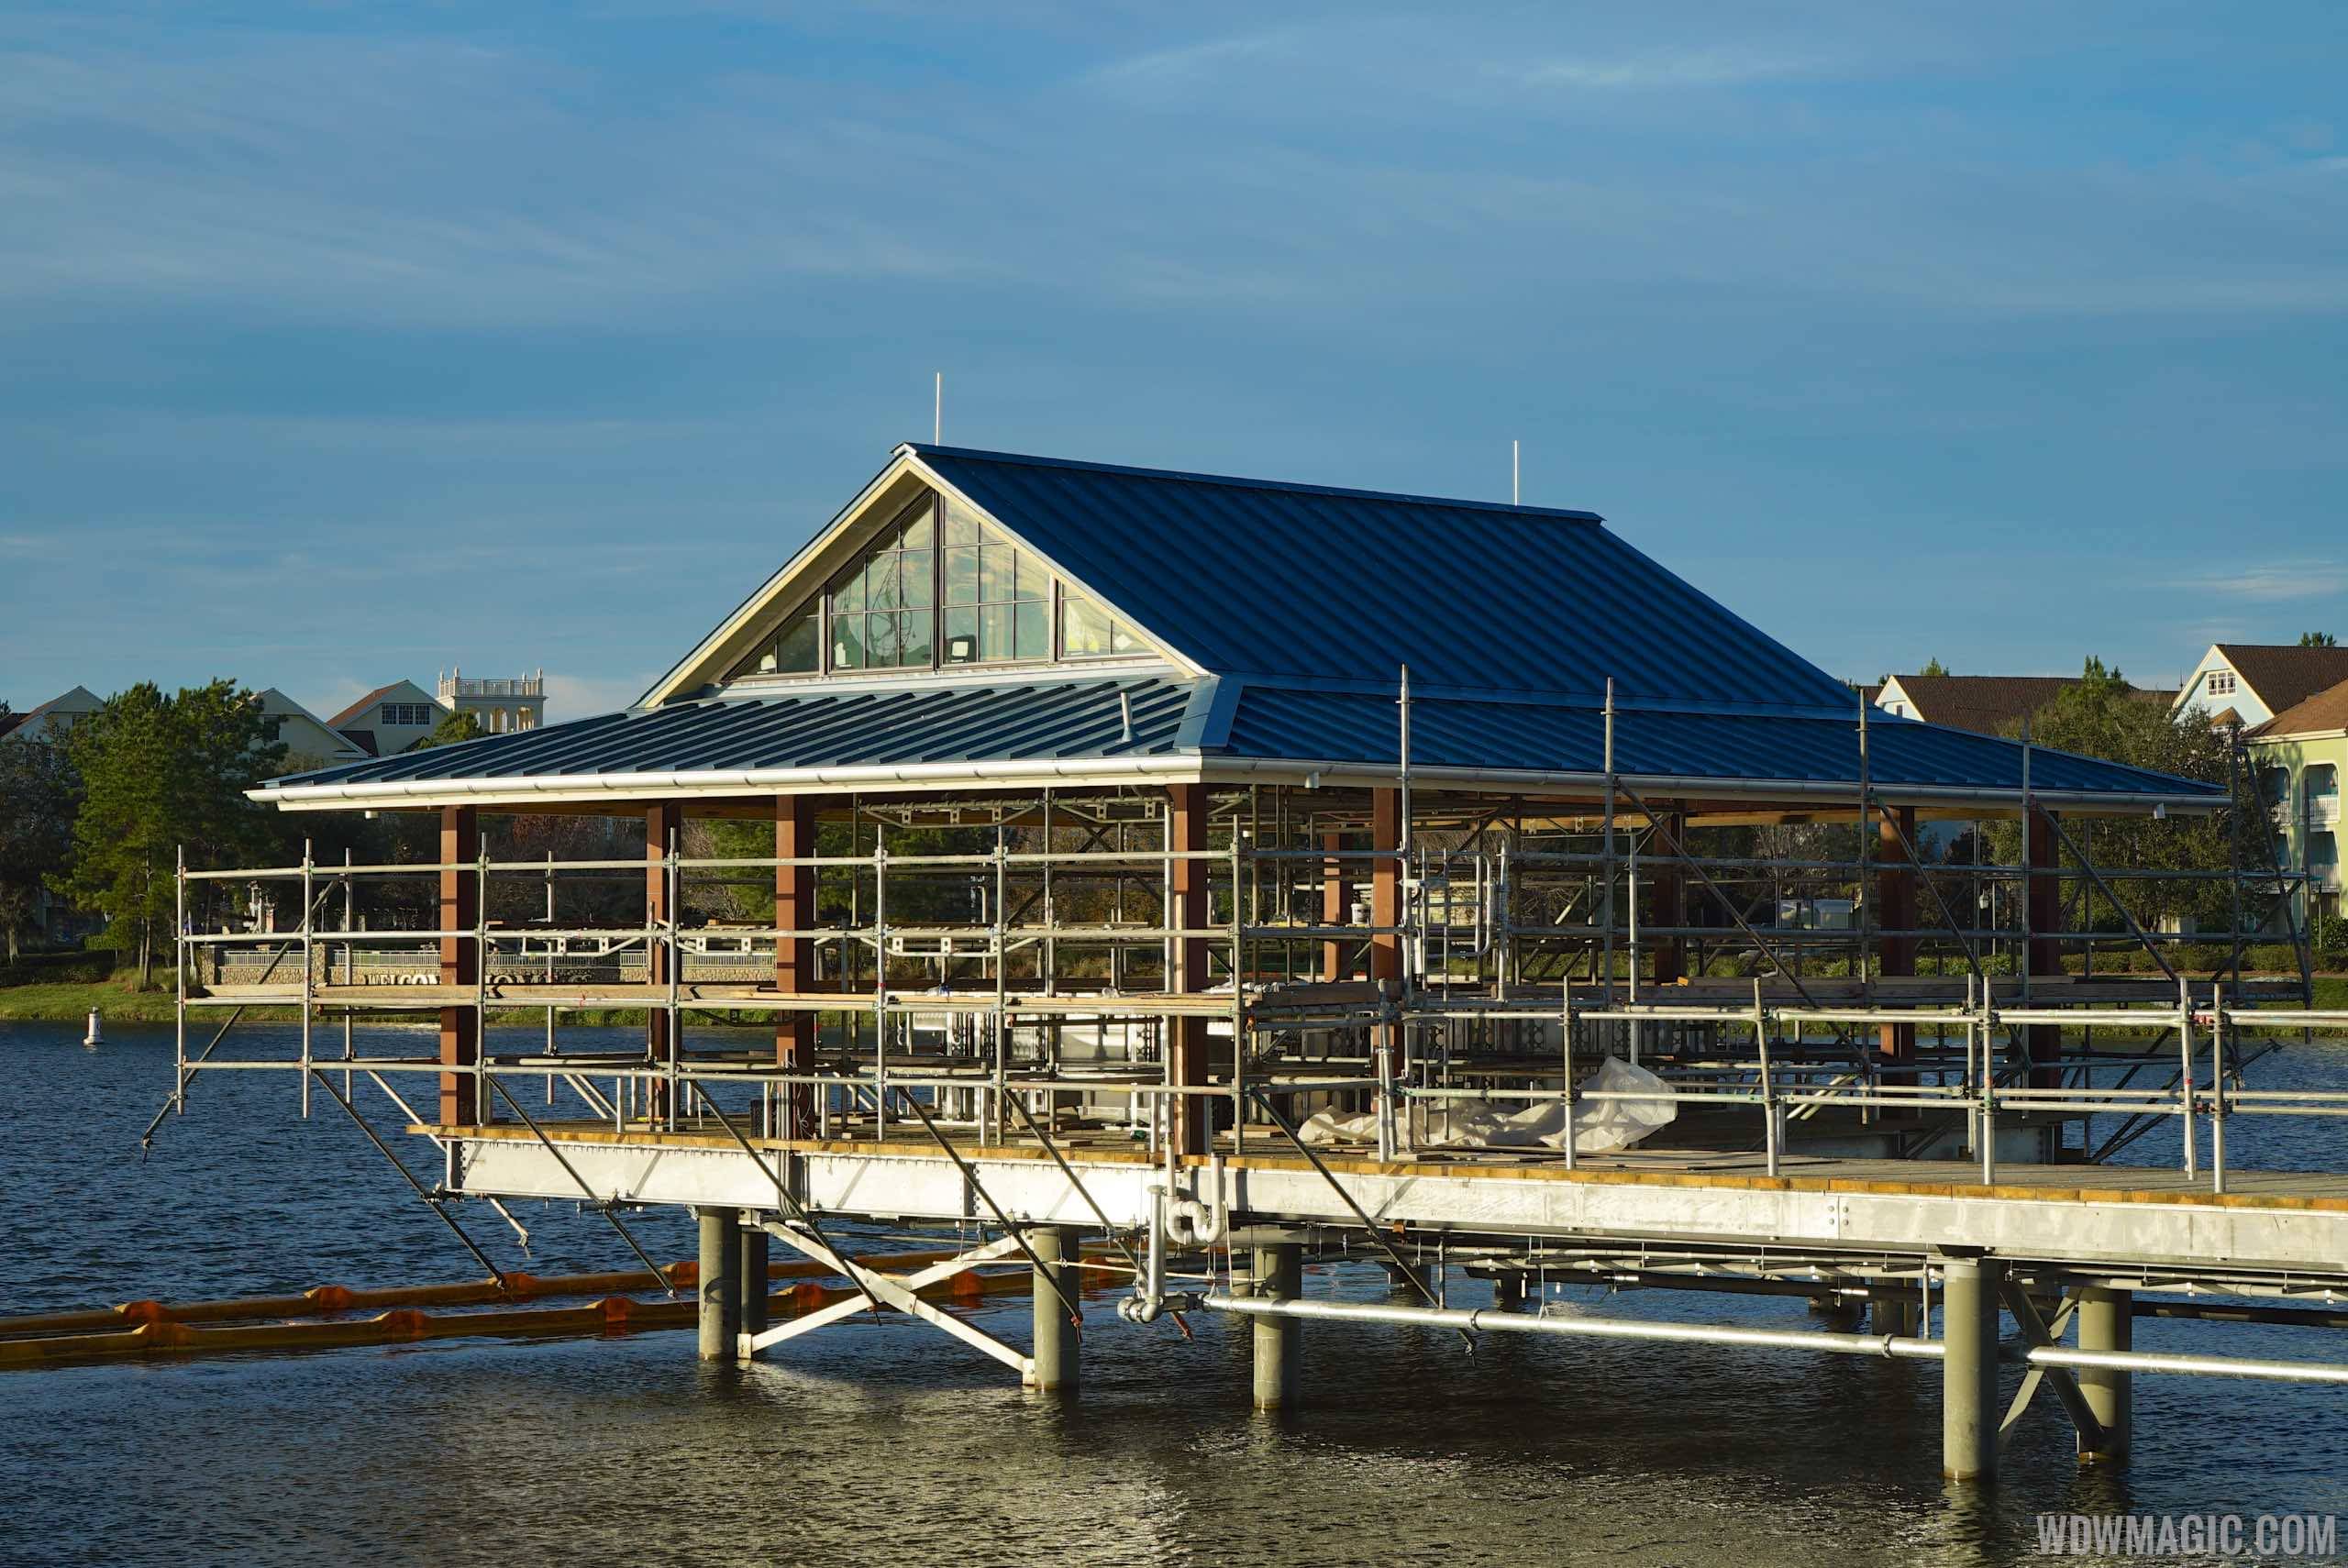 The BOATHOUSE construction